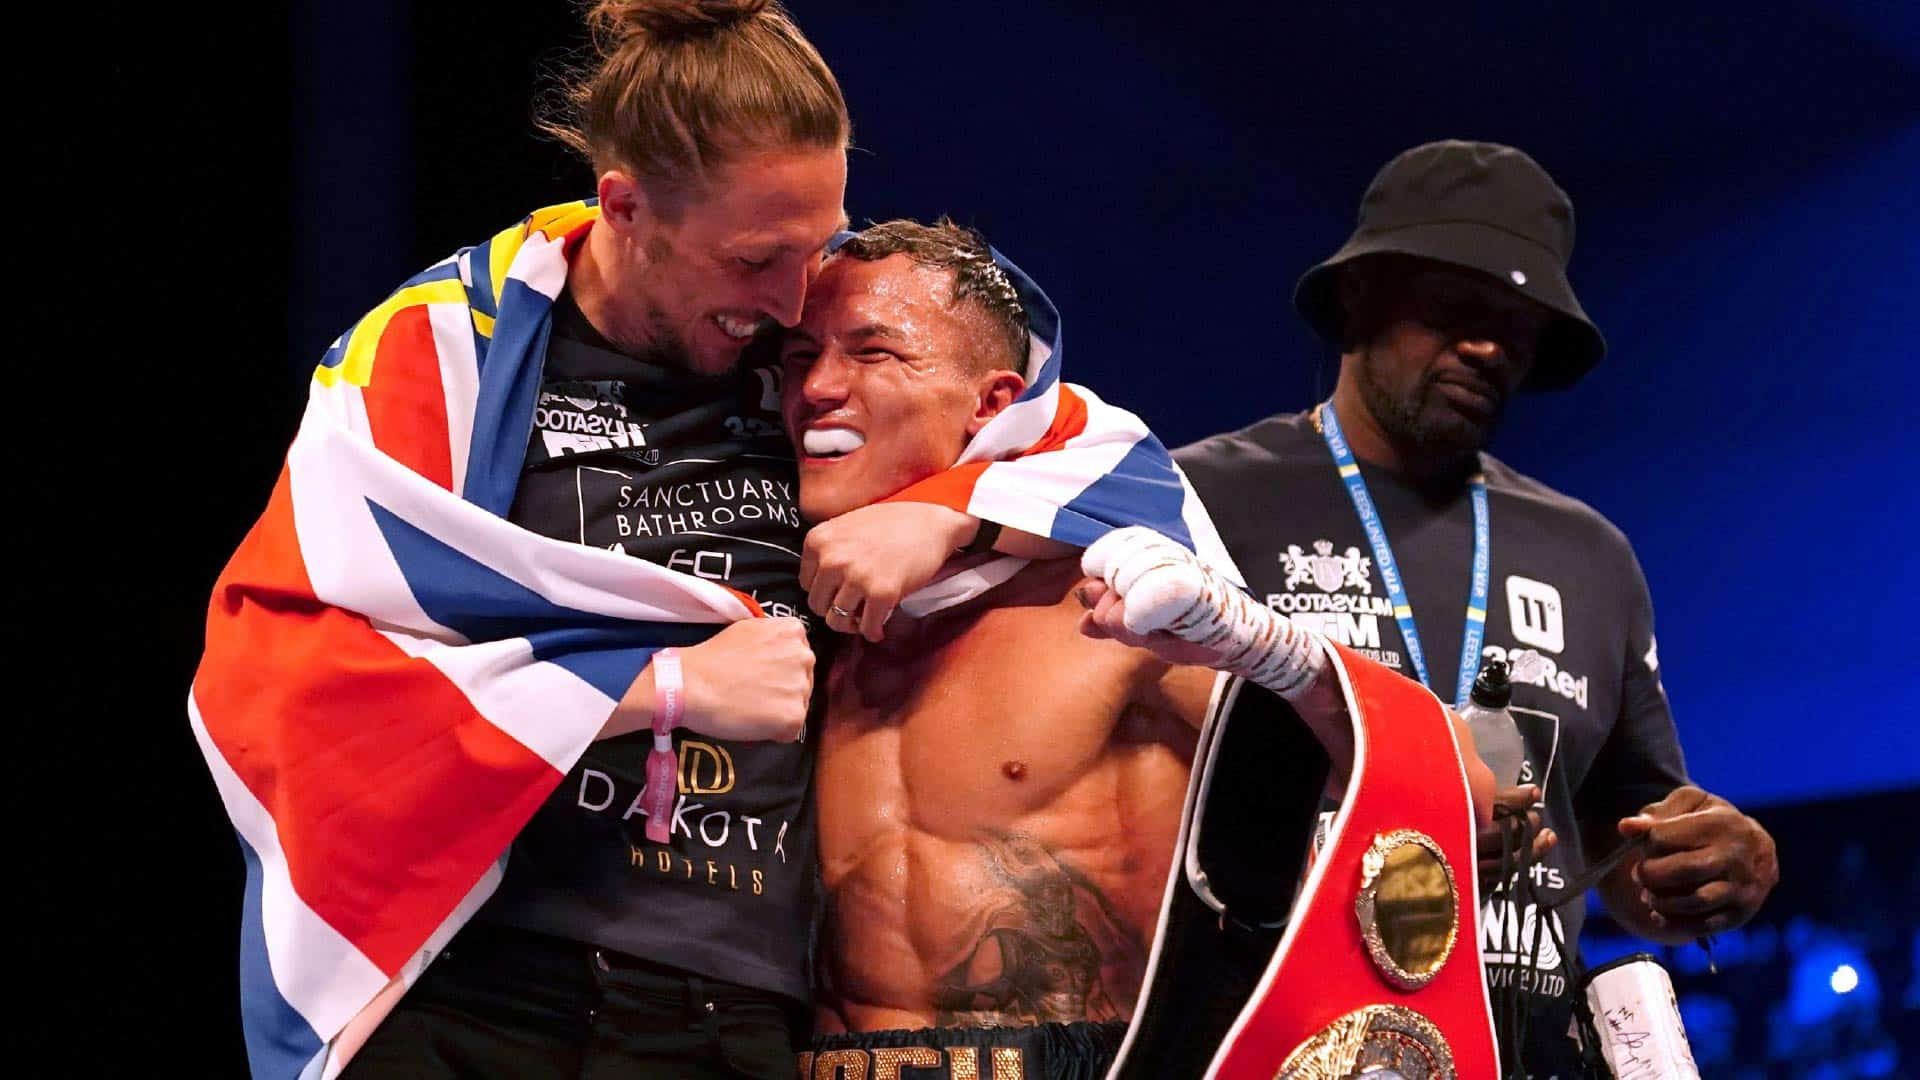 Luke Ayling squeezing Josh Warrington around the head after he won his last world title fight. Josh is grimacing, because Ayling doesn't realise he has a broken jaw